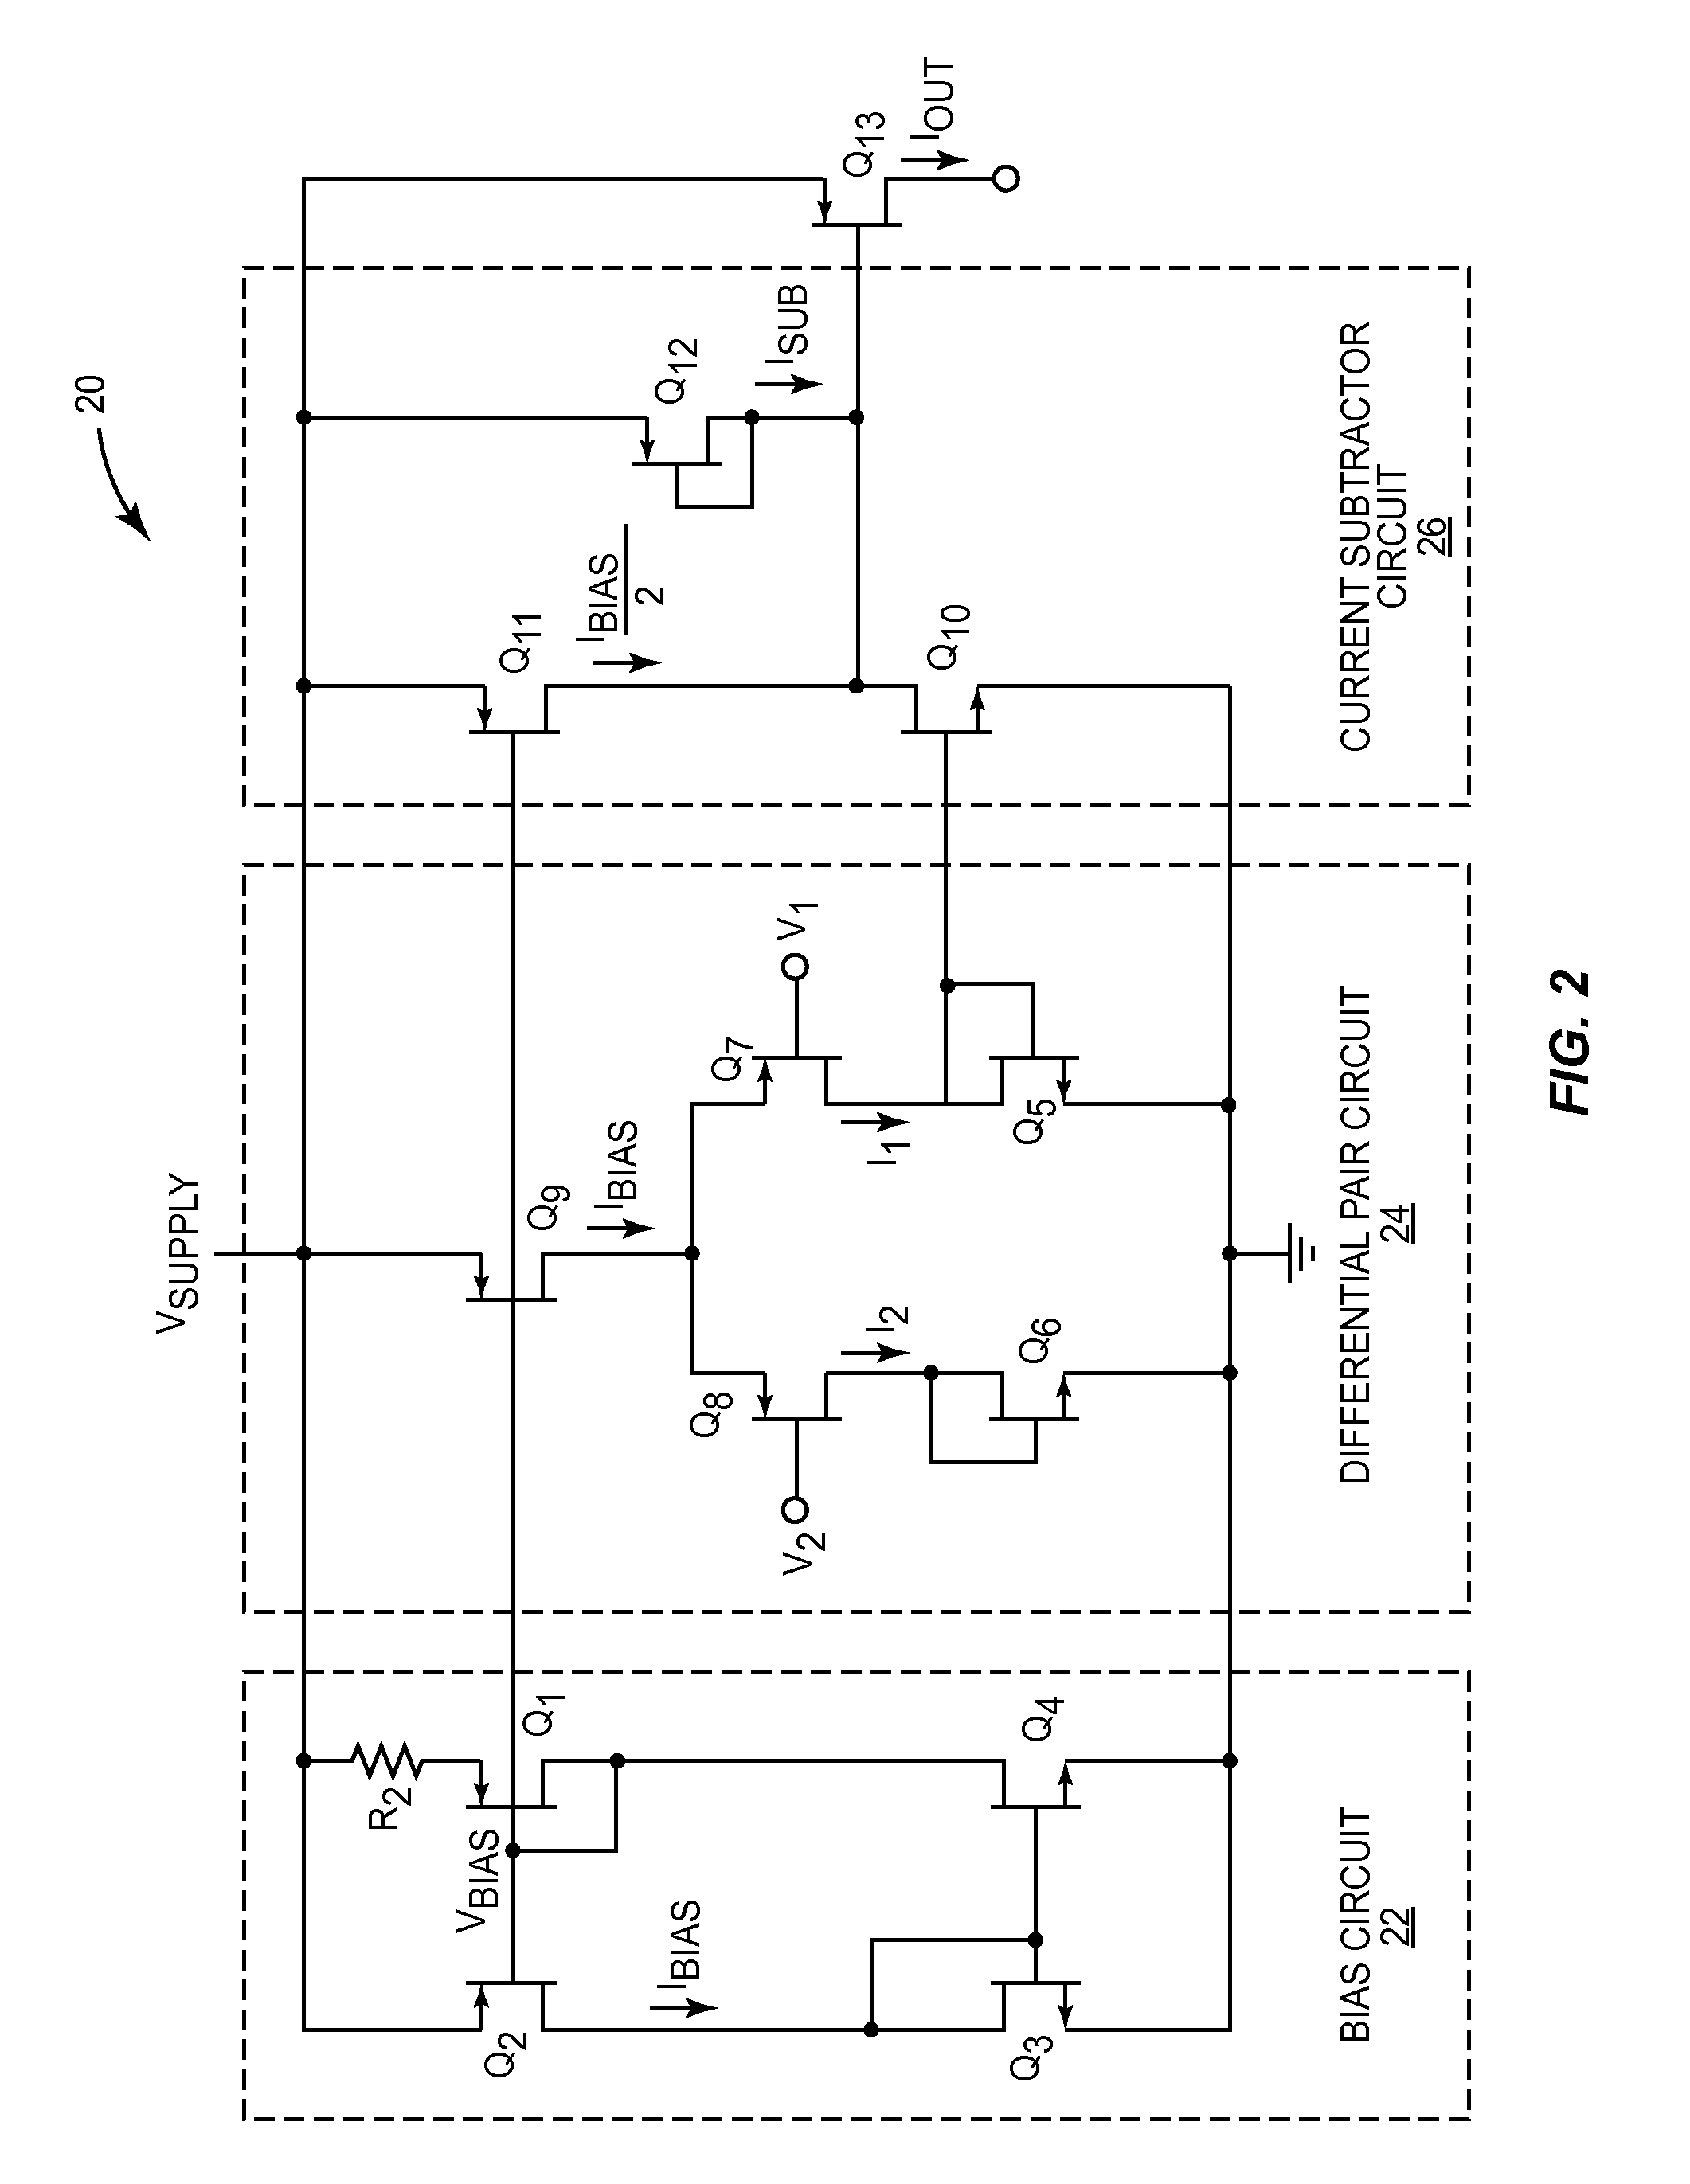 Method of generating multiple current sources from a single reference resistor